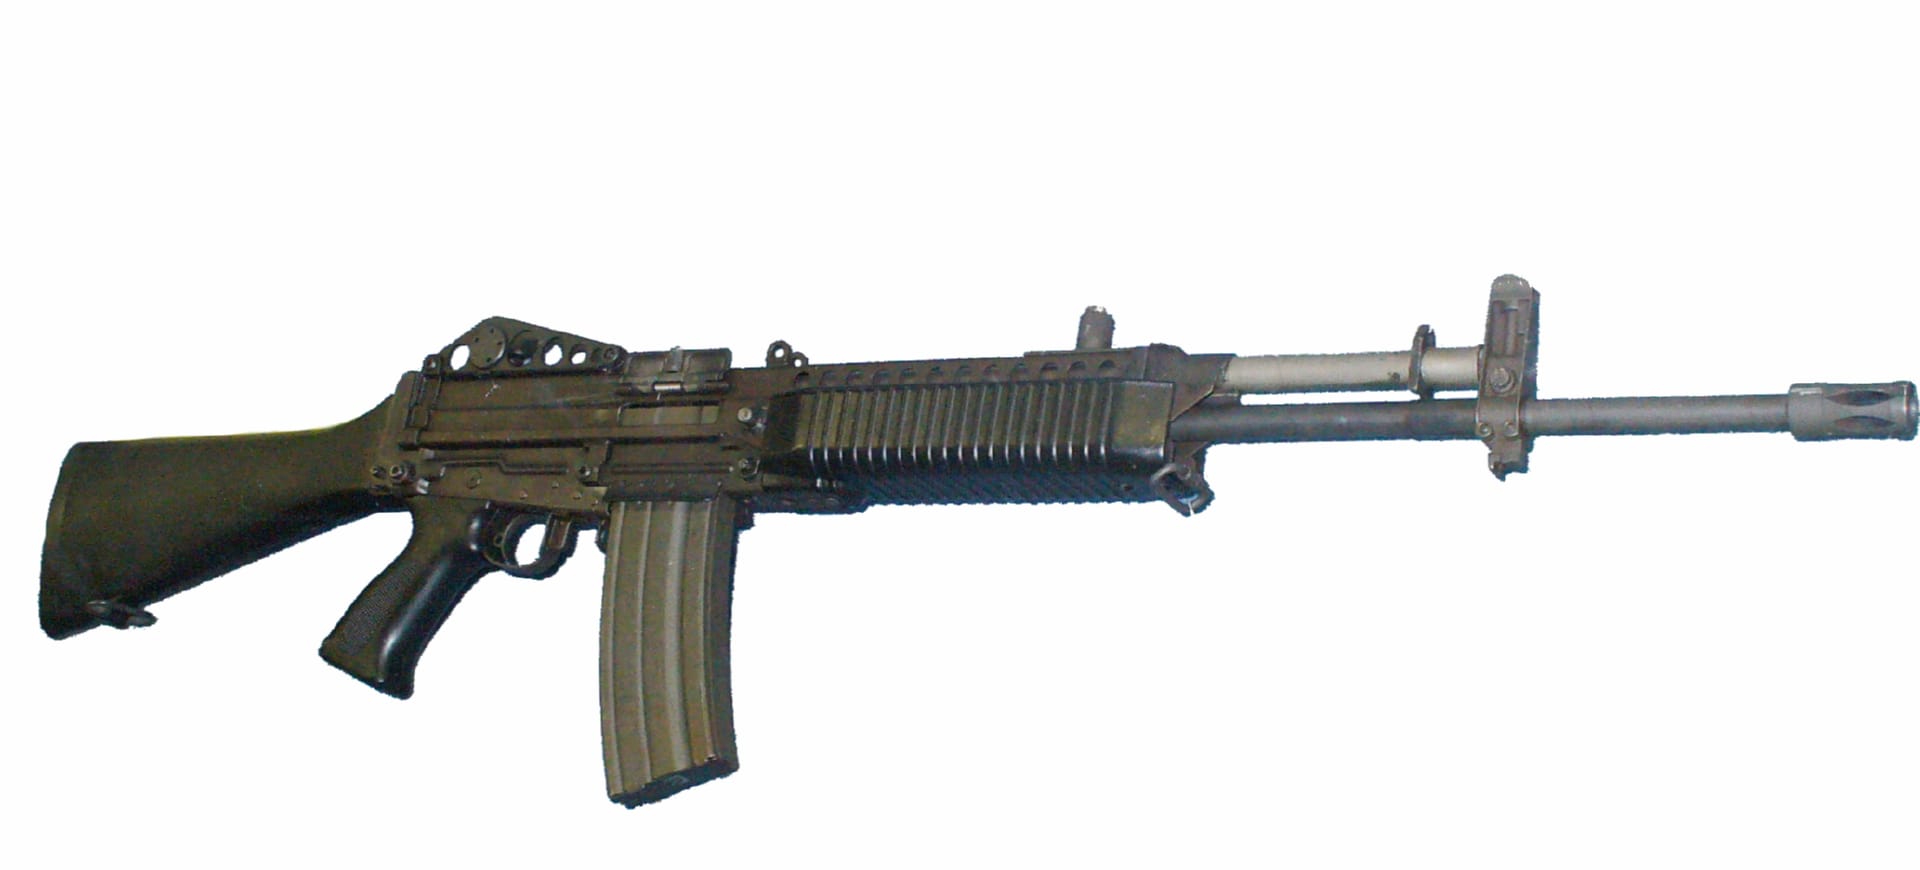 Stoner 63 Assault Rifle wallpapers HD quality